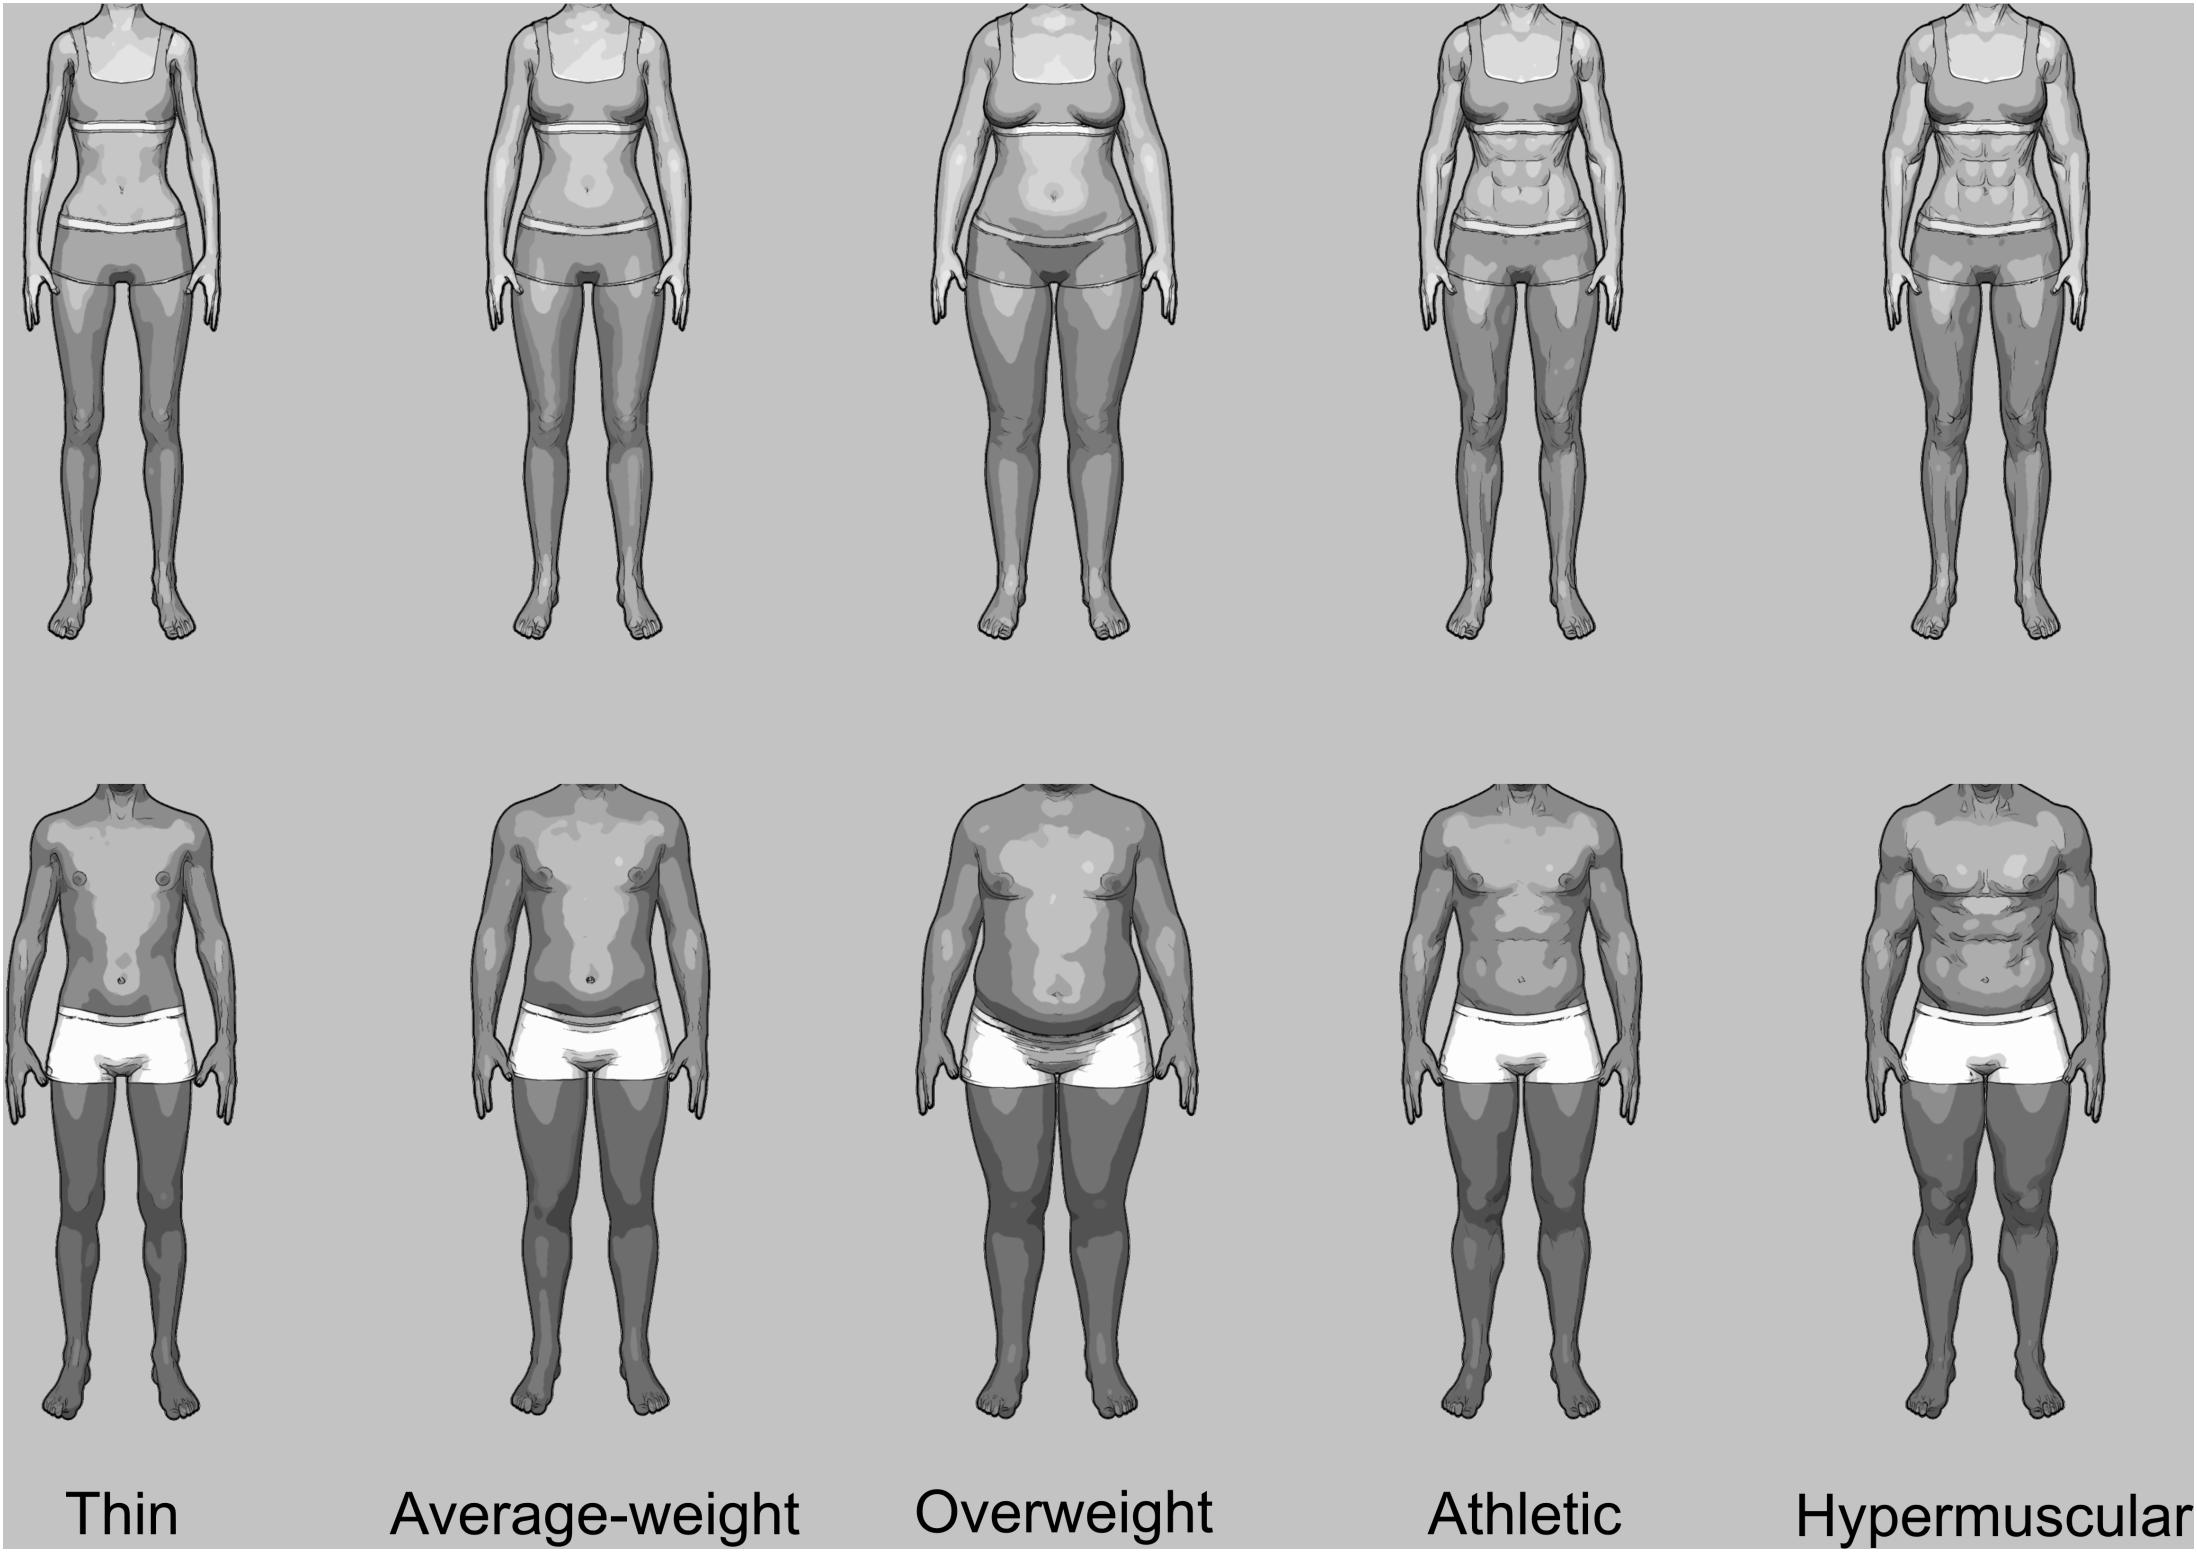 BODY FAT PERCENTAGE – WHY DO MEN AND WOMEN DIFFER? - Evolt 360